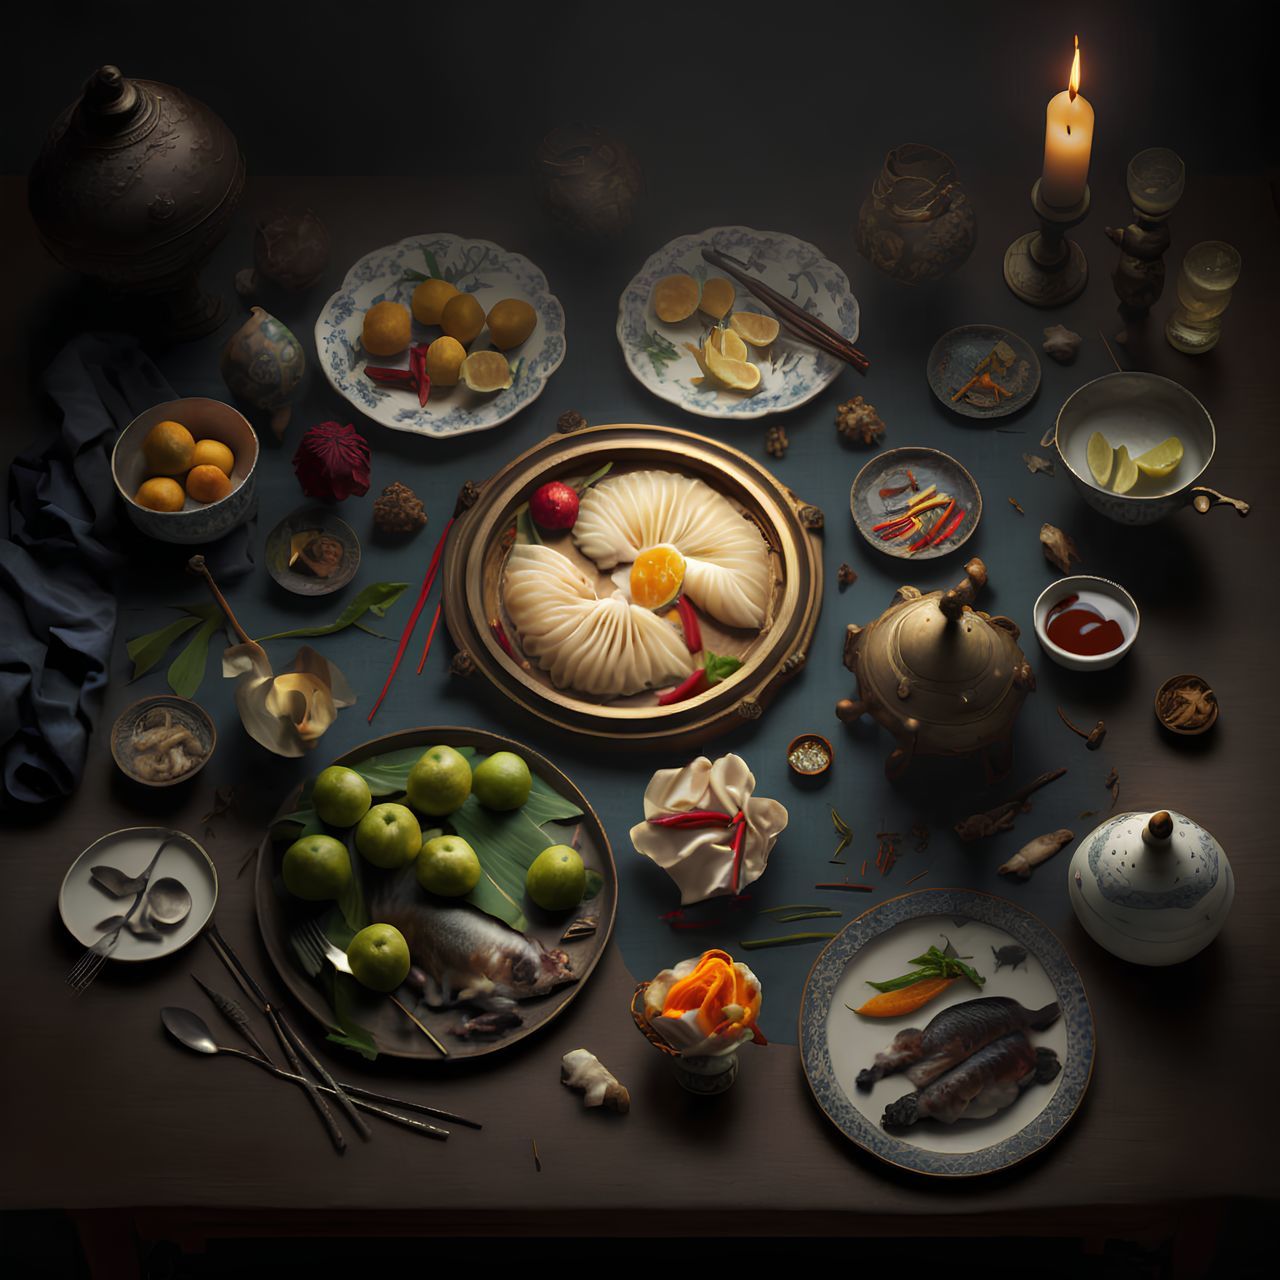 food and drink, food, healthy eating, fruit, wellbeing, freshness, high angle view, painting, no people, plate, still life photography, table, bowl, large group of objects, indoors, directly above, abundance, still life, variation, vegetable, meal, citrus fruit, drink, dark